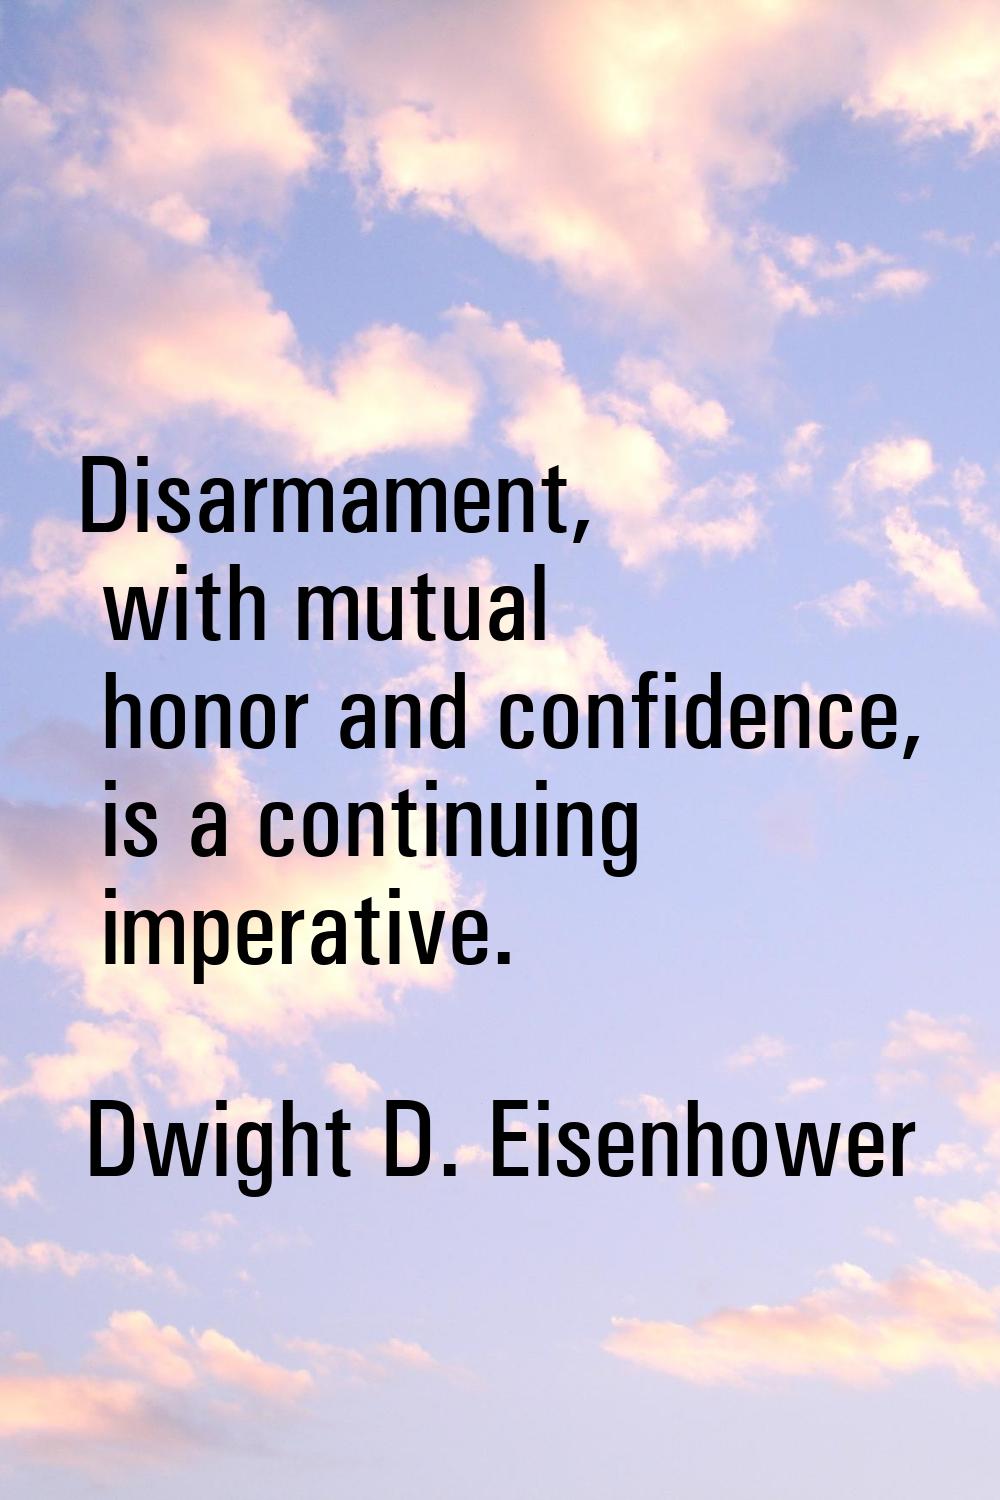 Disarmament, with mutual honor and confidence, is a continuing imperative.